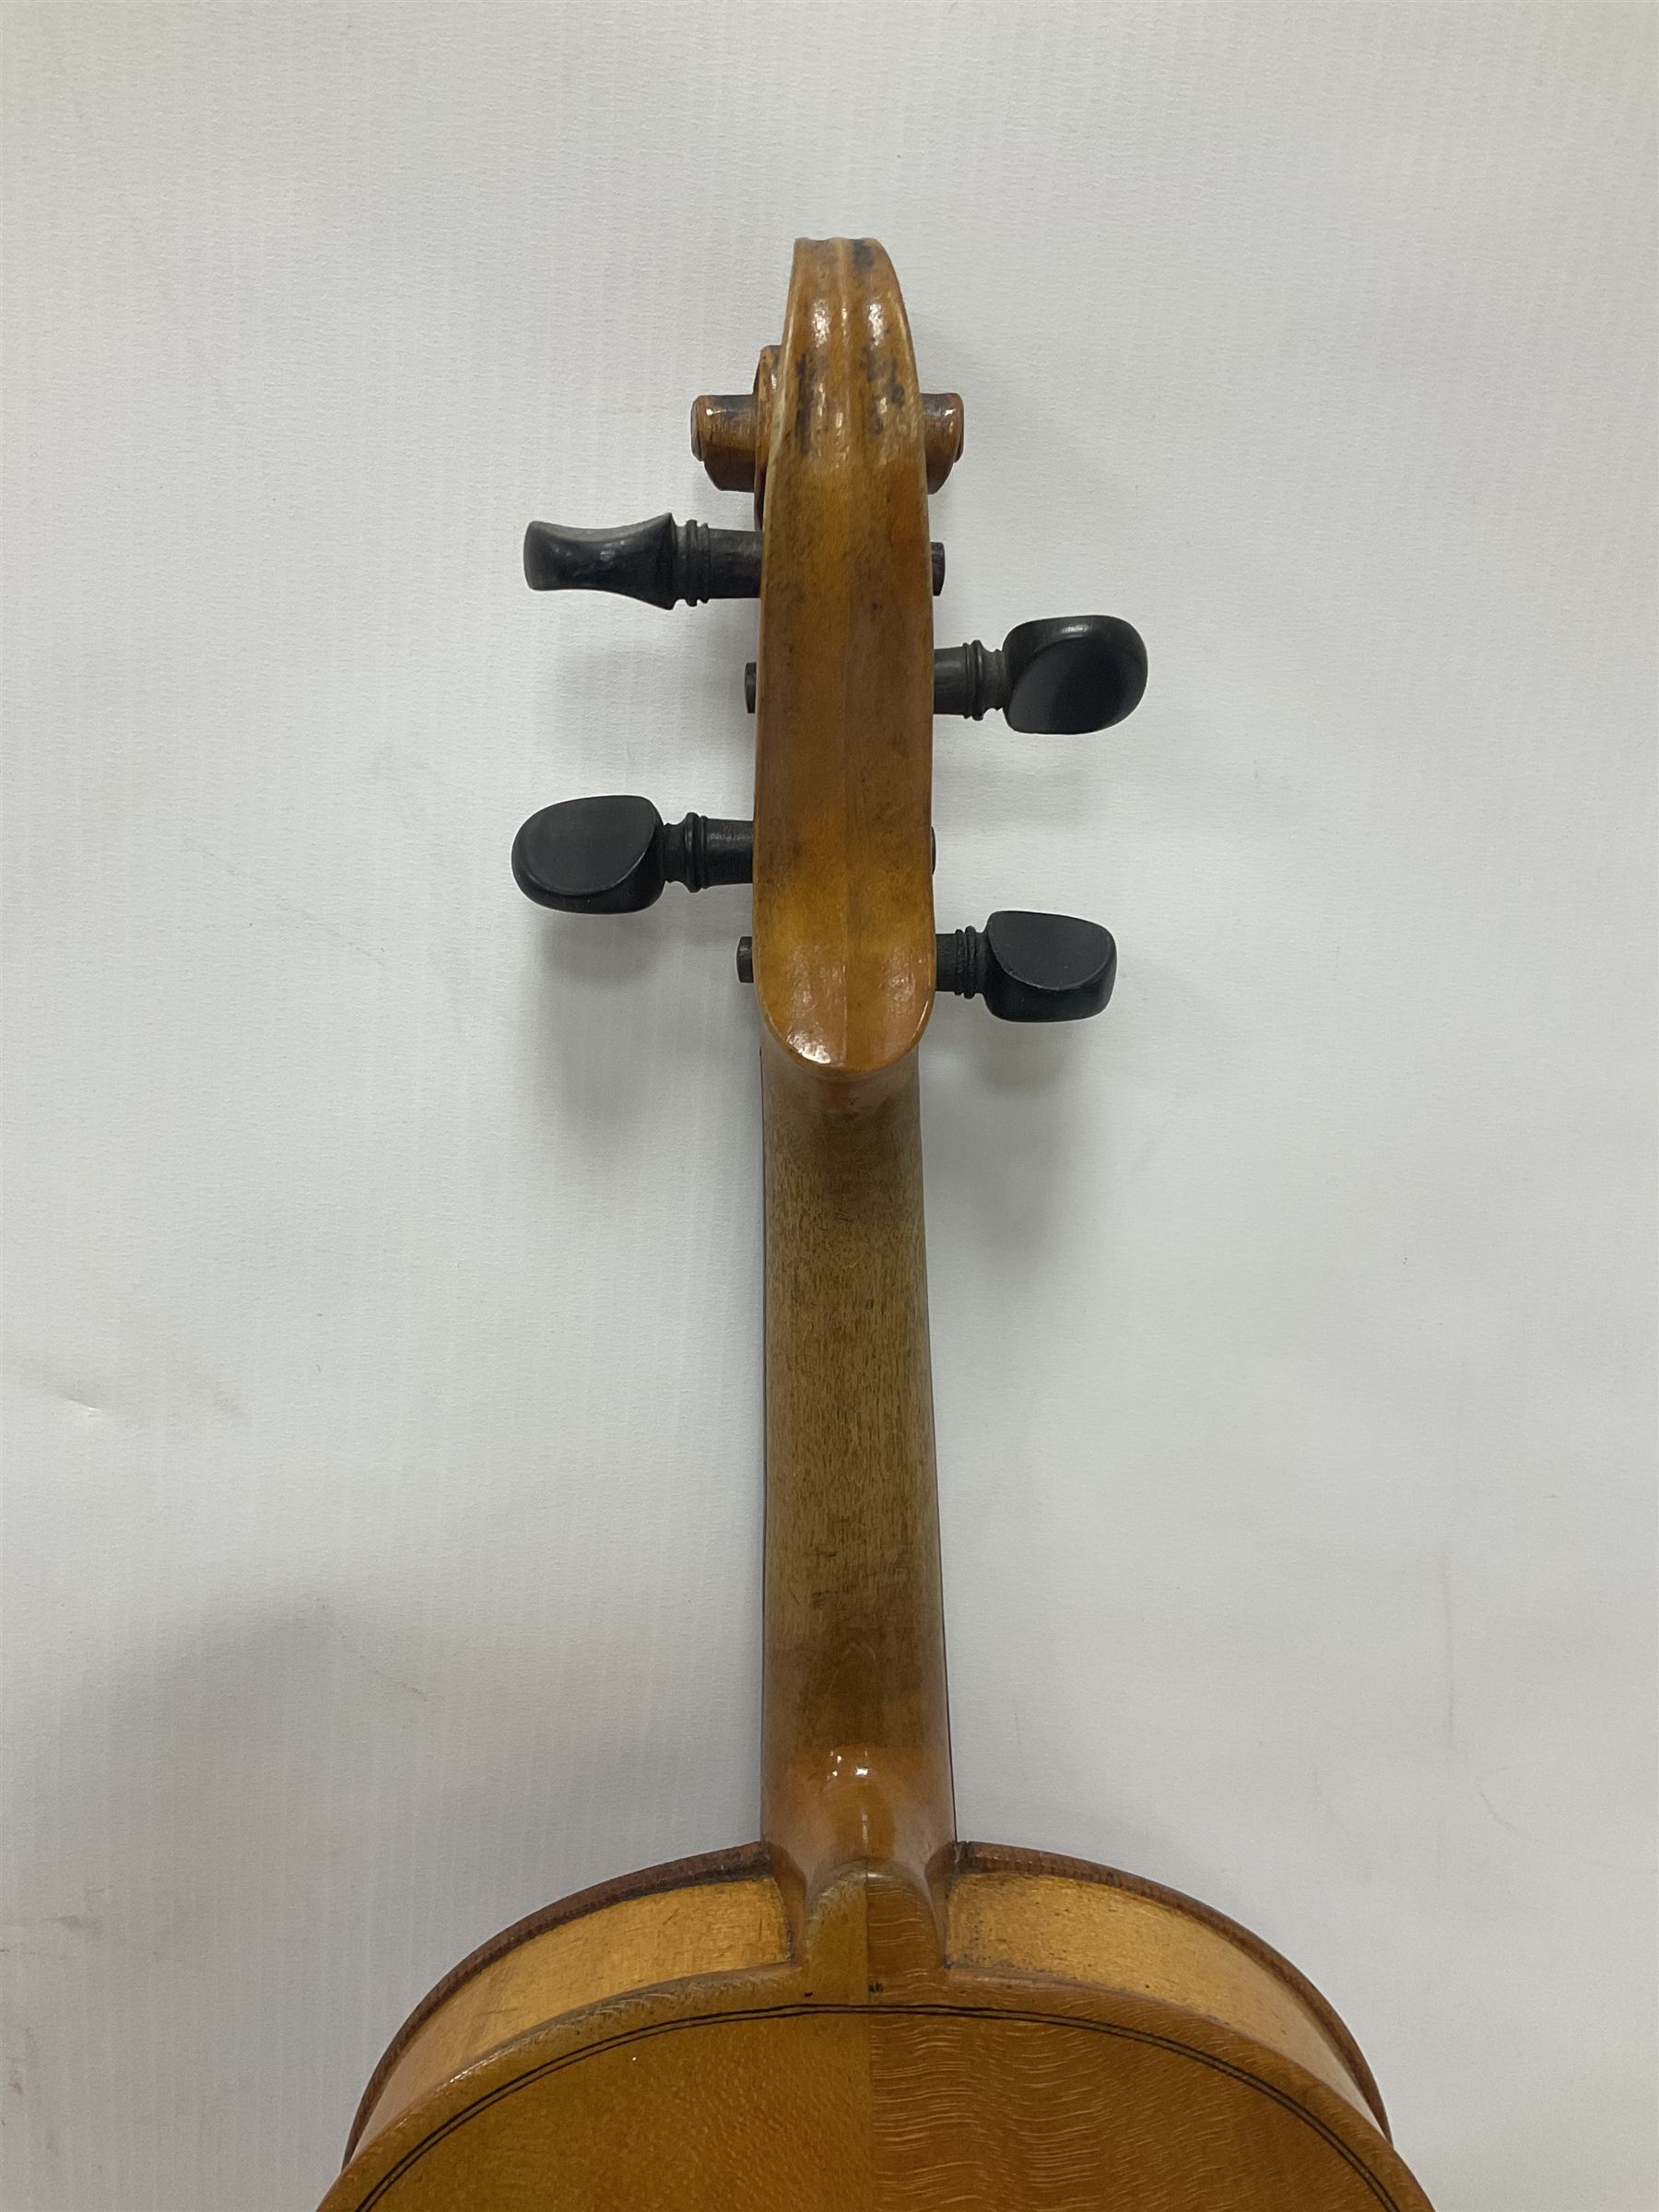 19th century 3/4 size violin in its original fitted wooden “coffin case” Overall length 53cm No bow - Image 12 of 16